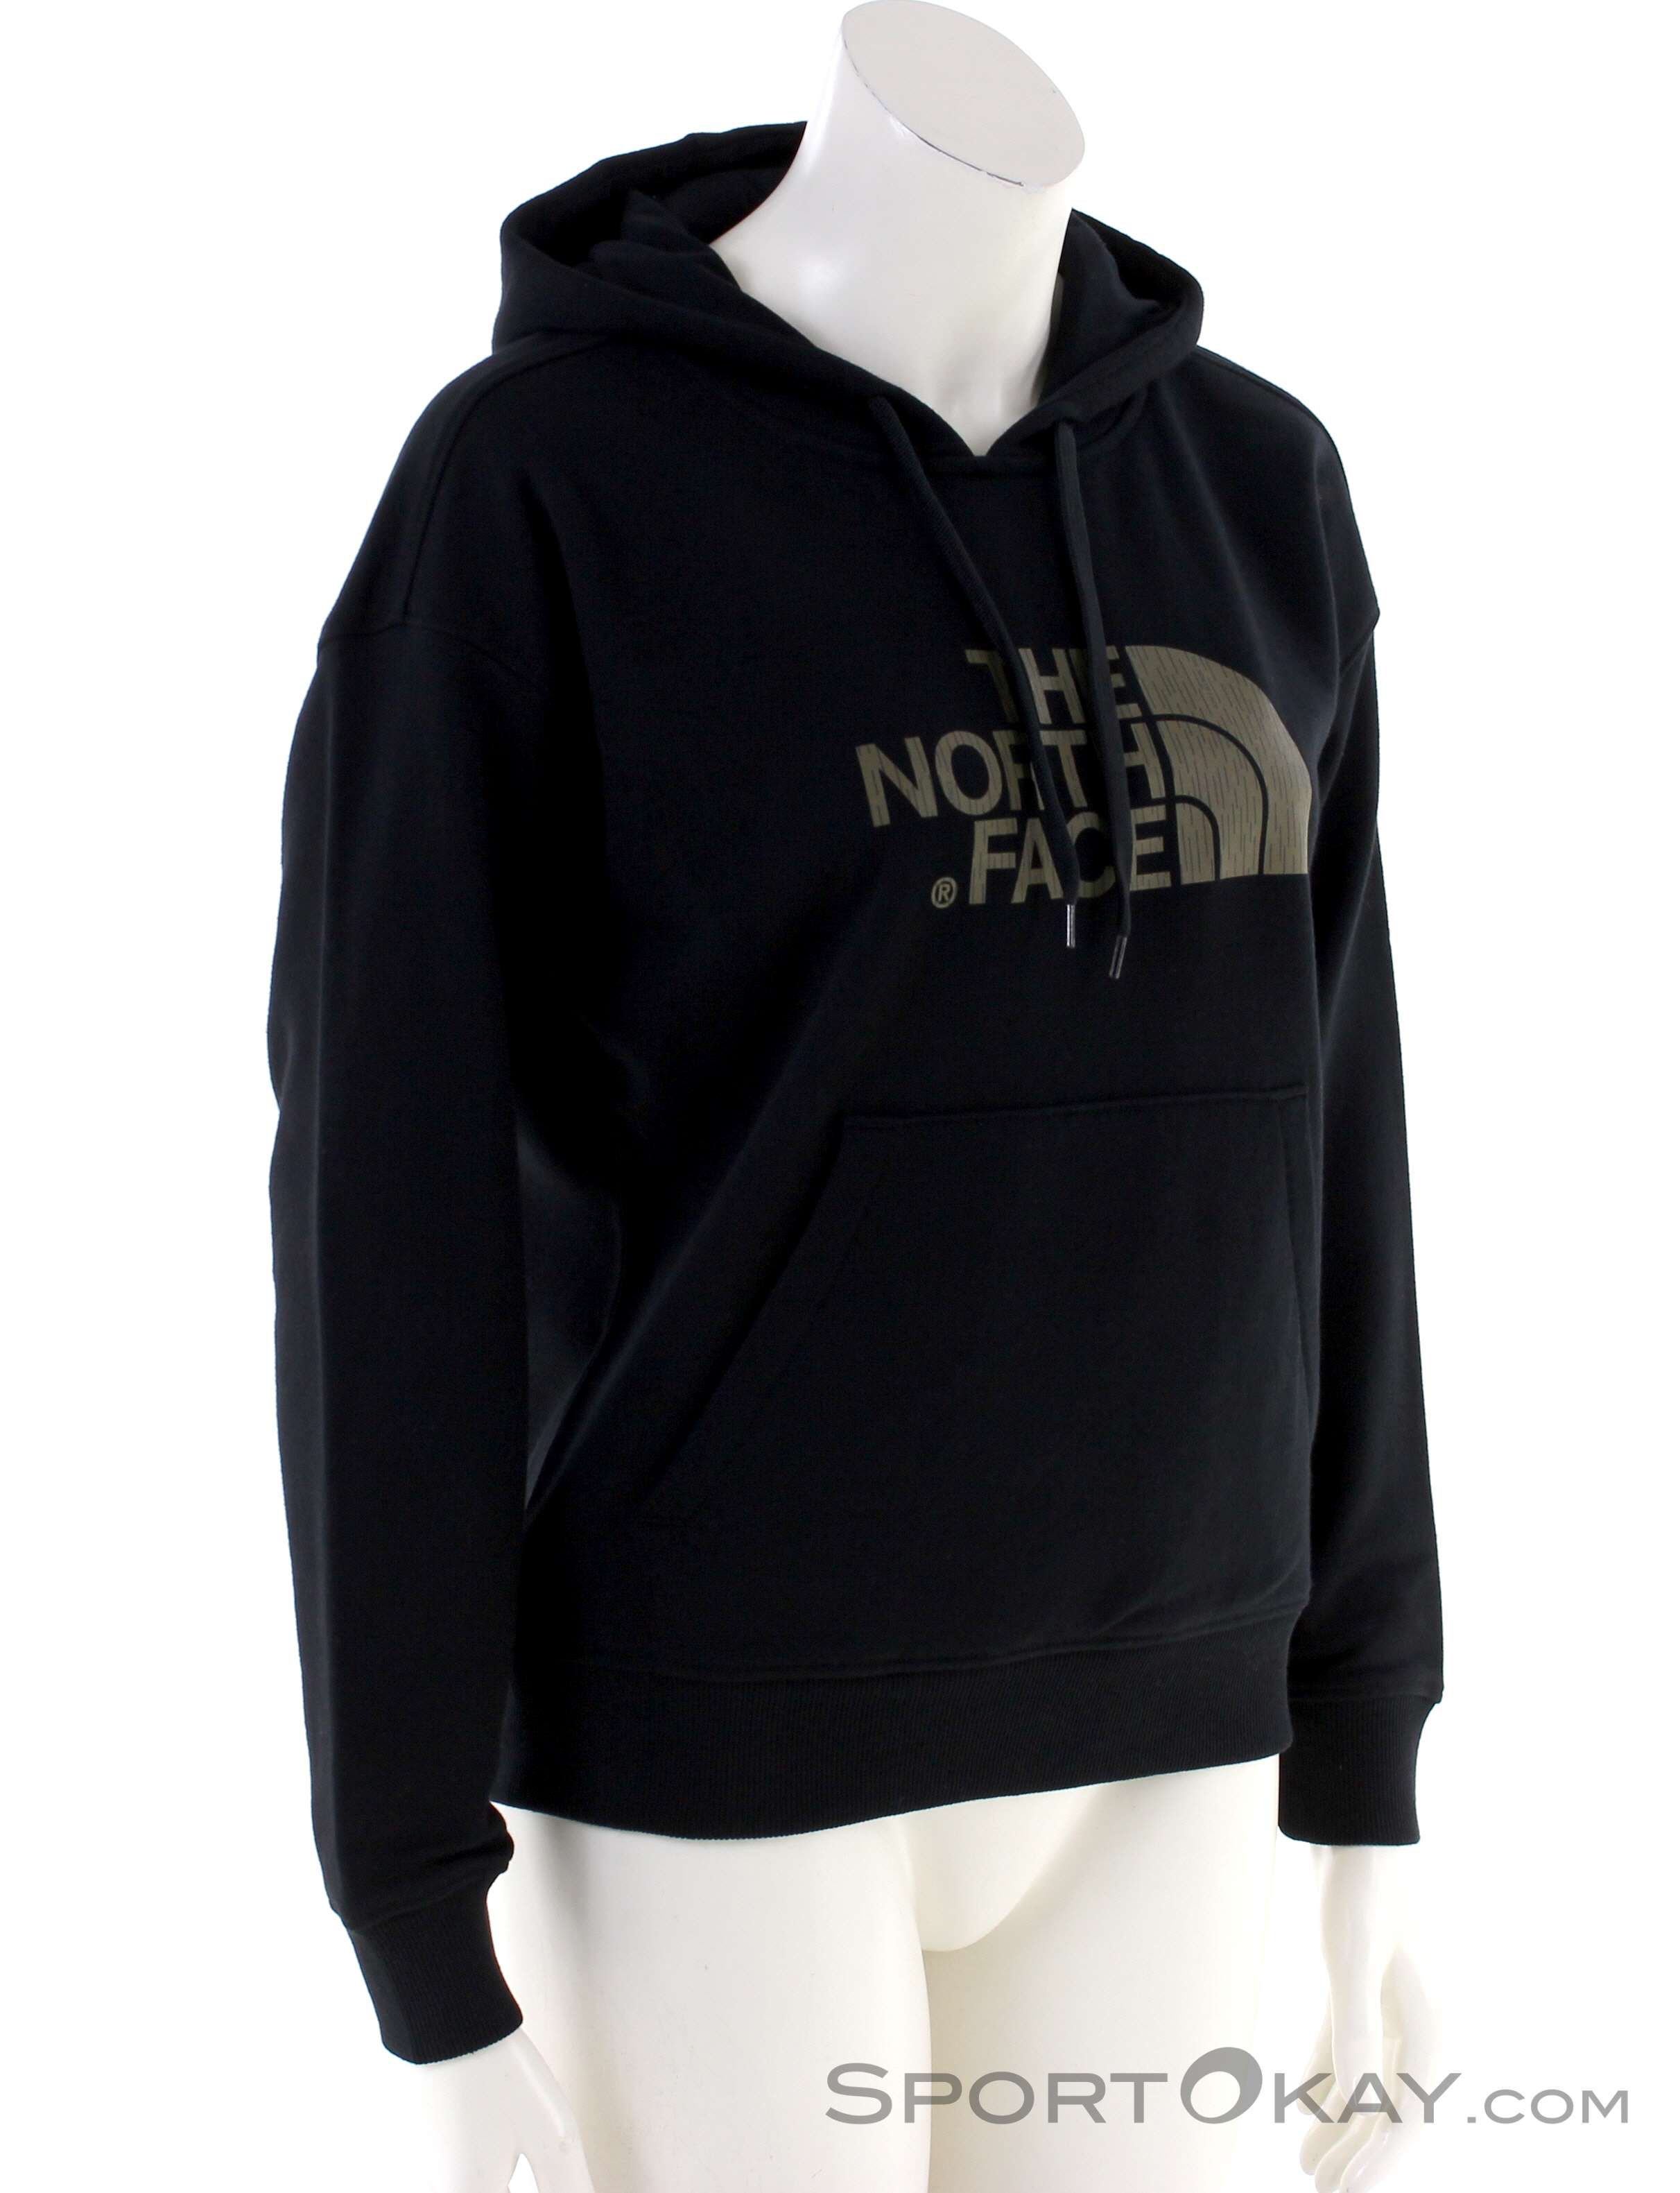 north face black sweater